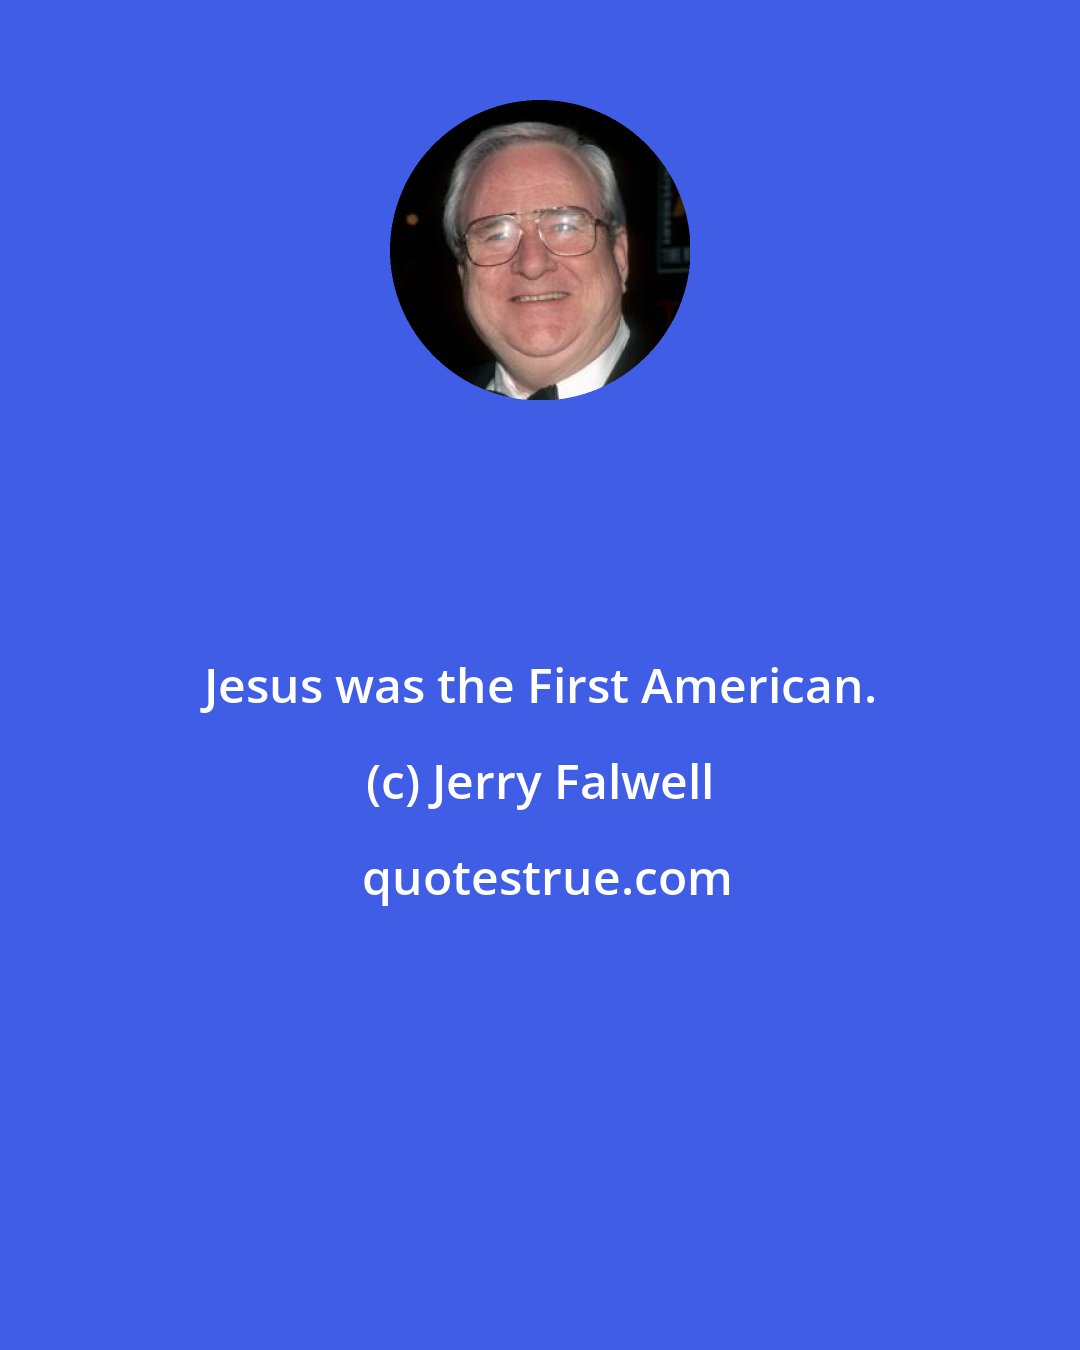 Jerry Falwell: Jesus was the First American.